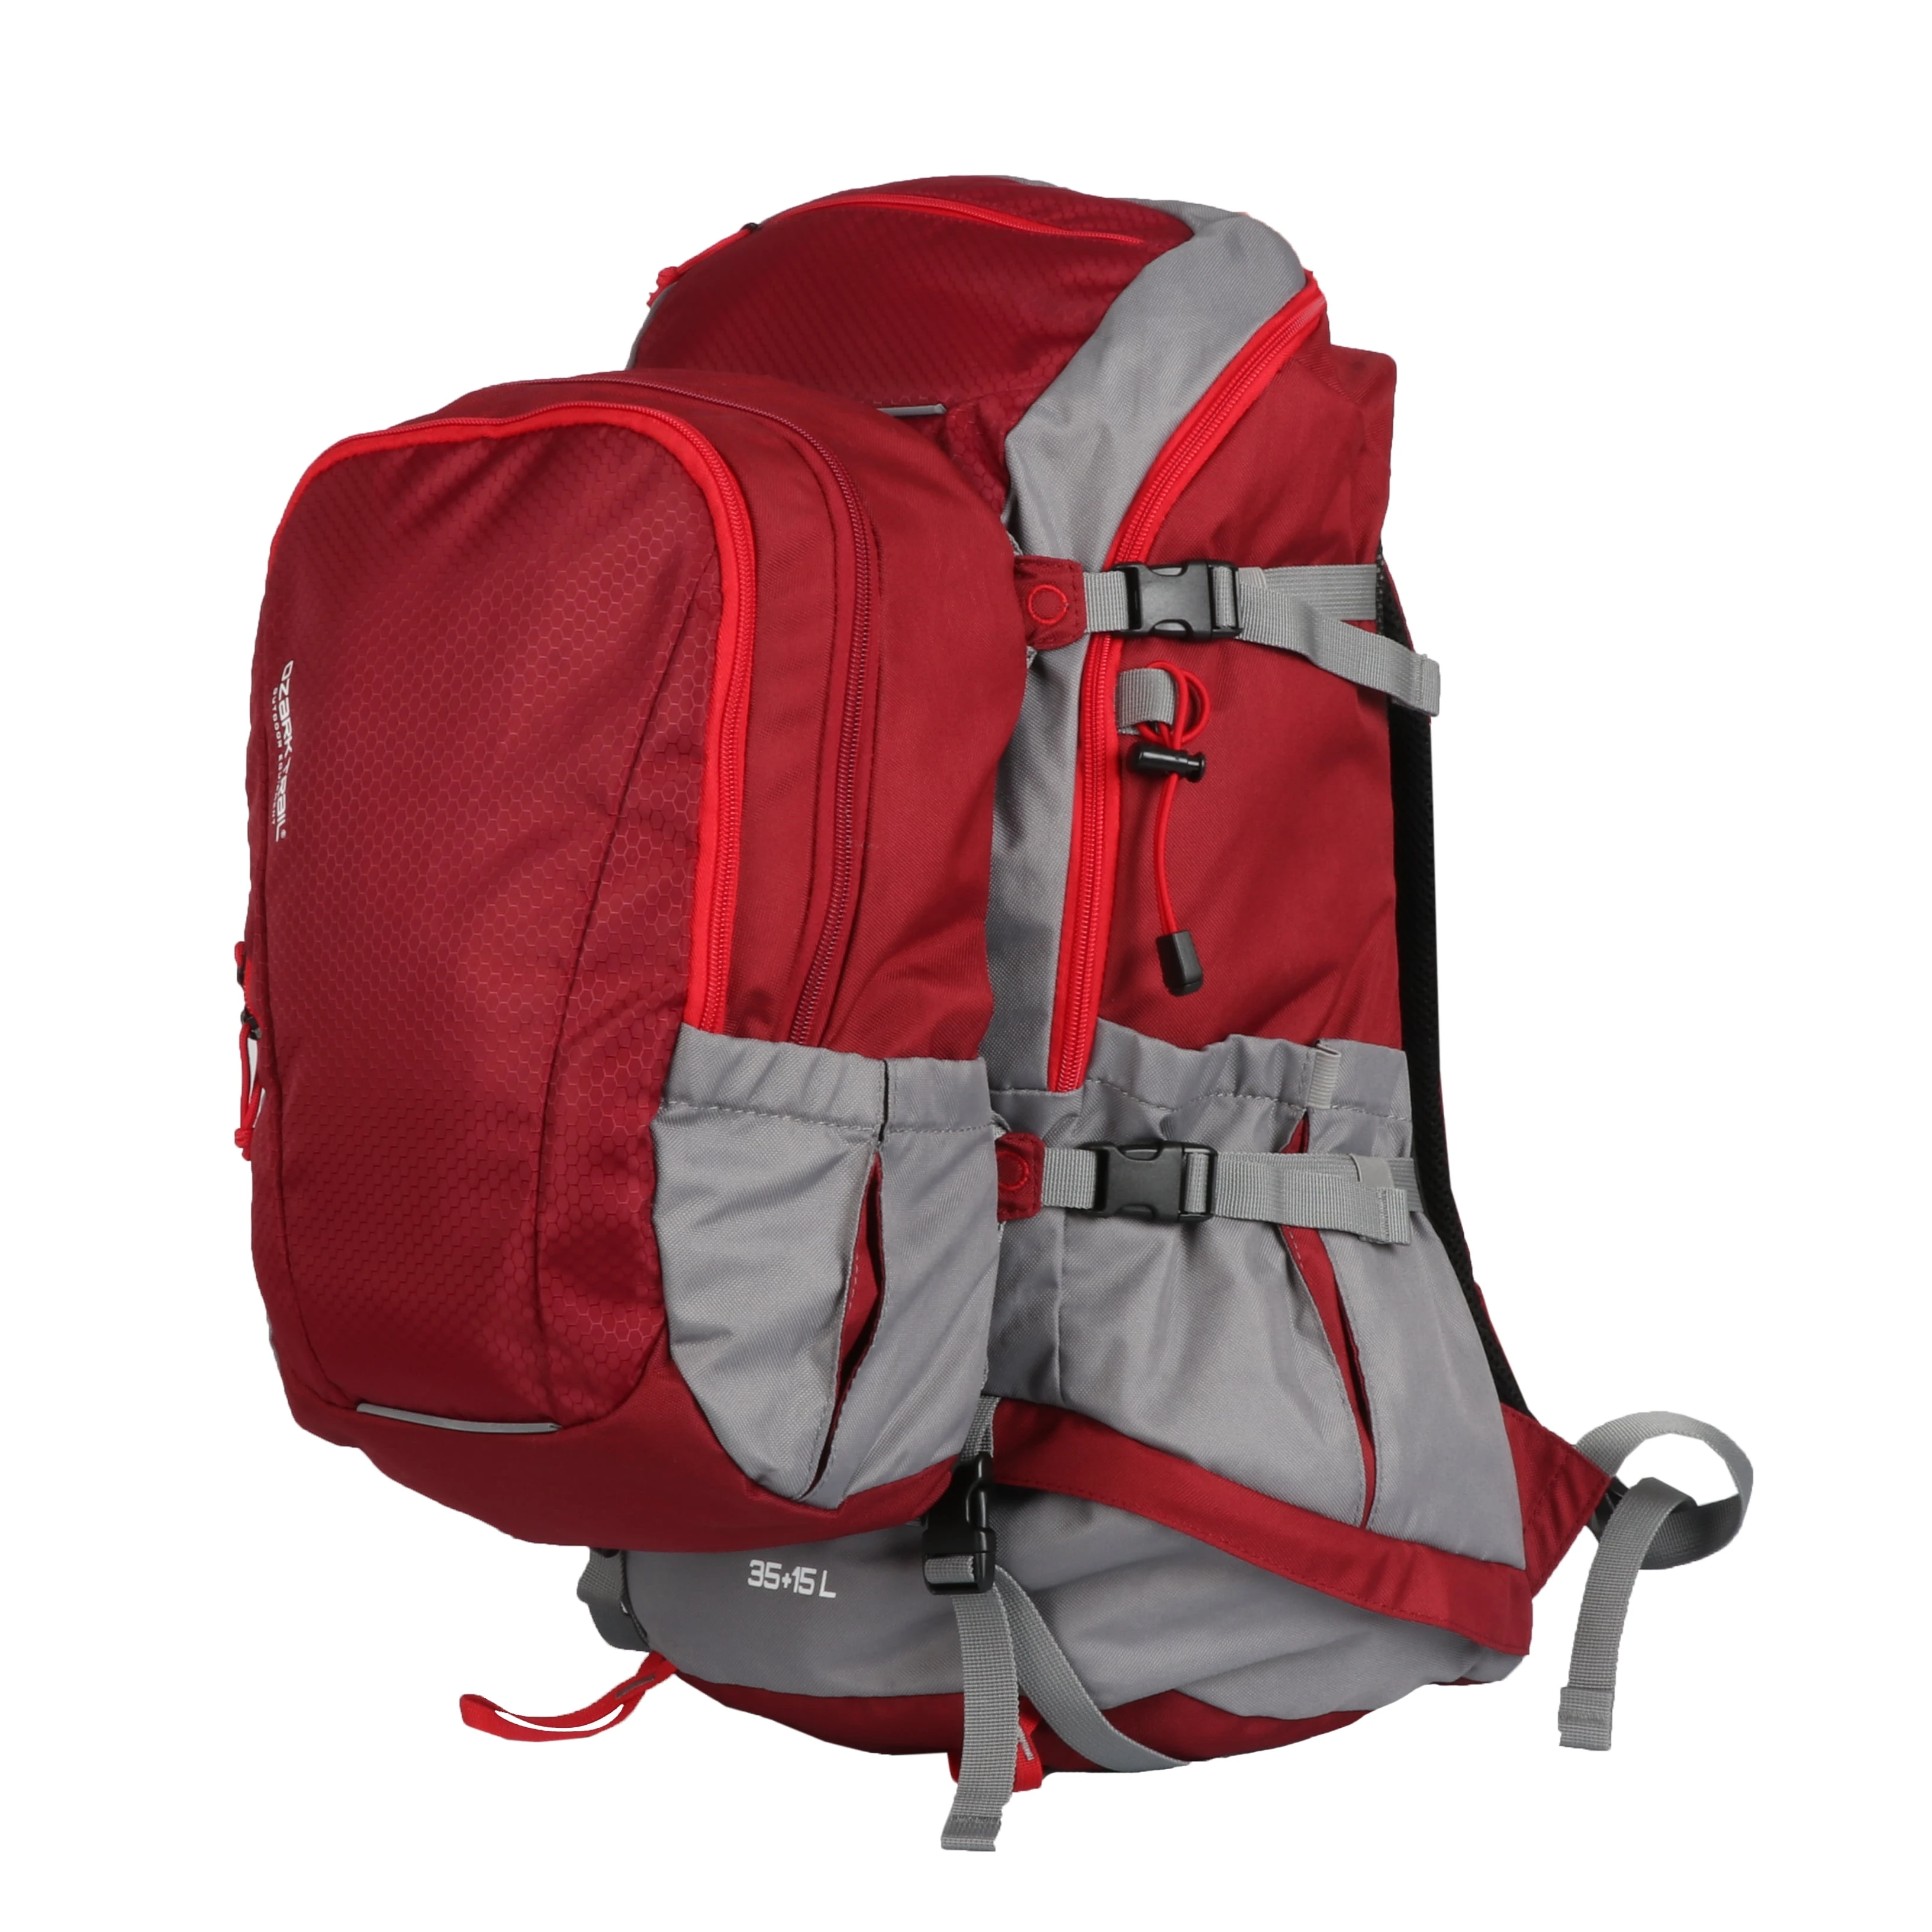 

2-in-1 Family Pack, 35 Liter Hiking Backpack with Detachable 15 Liter Daypack, Red